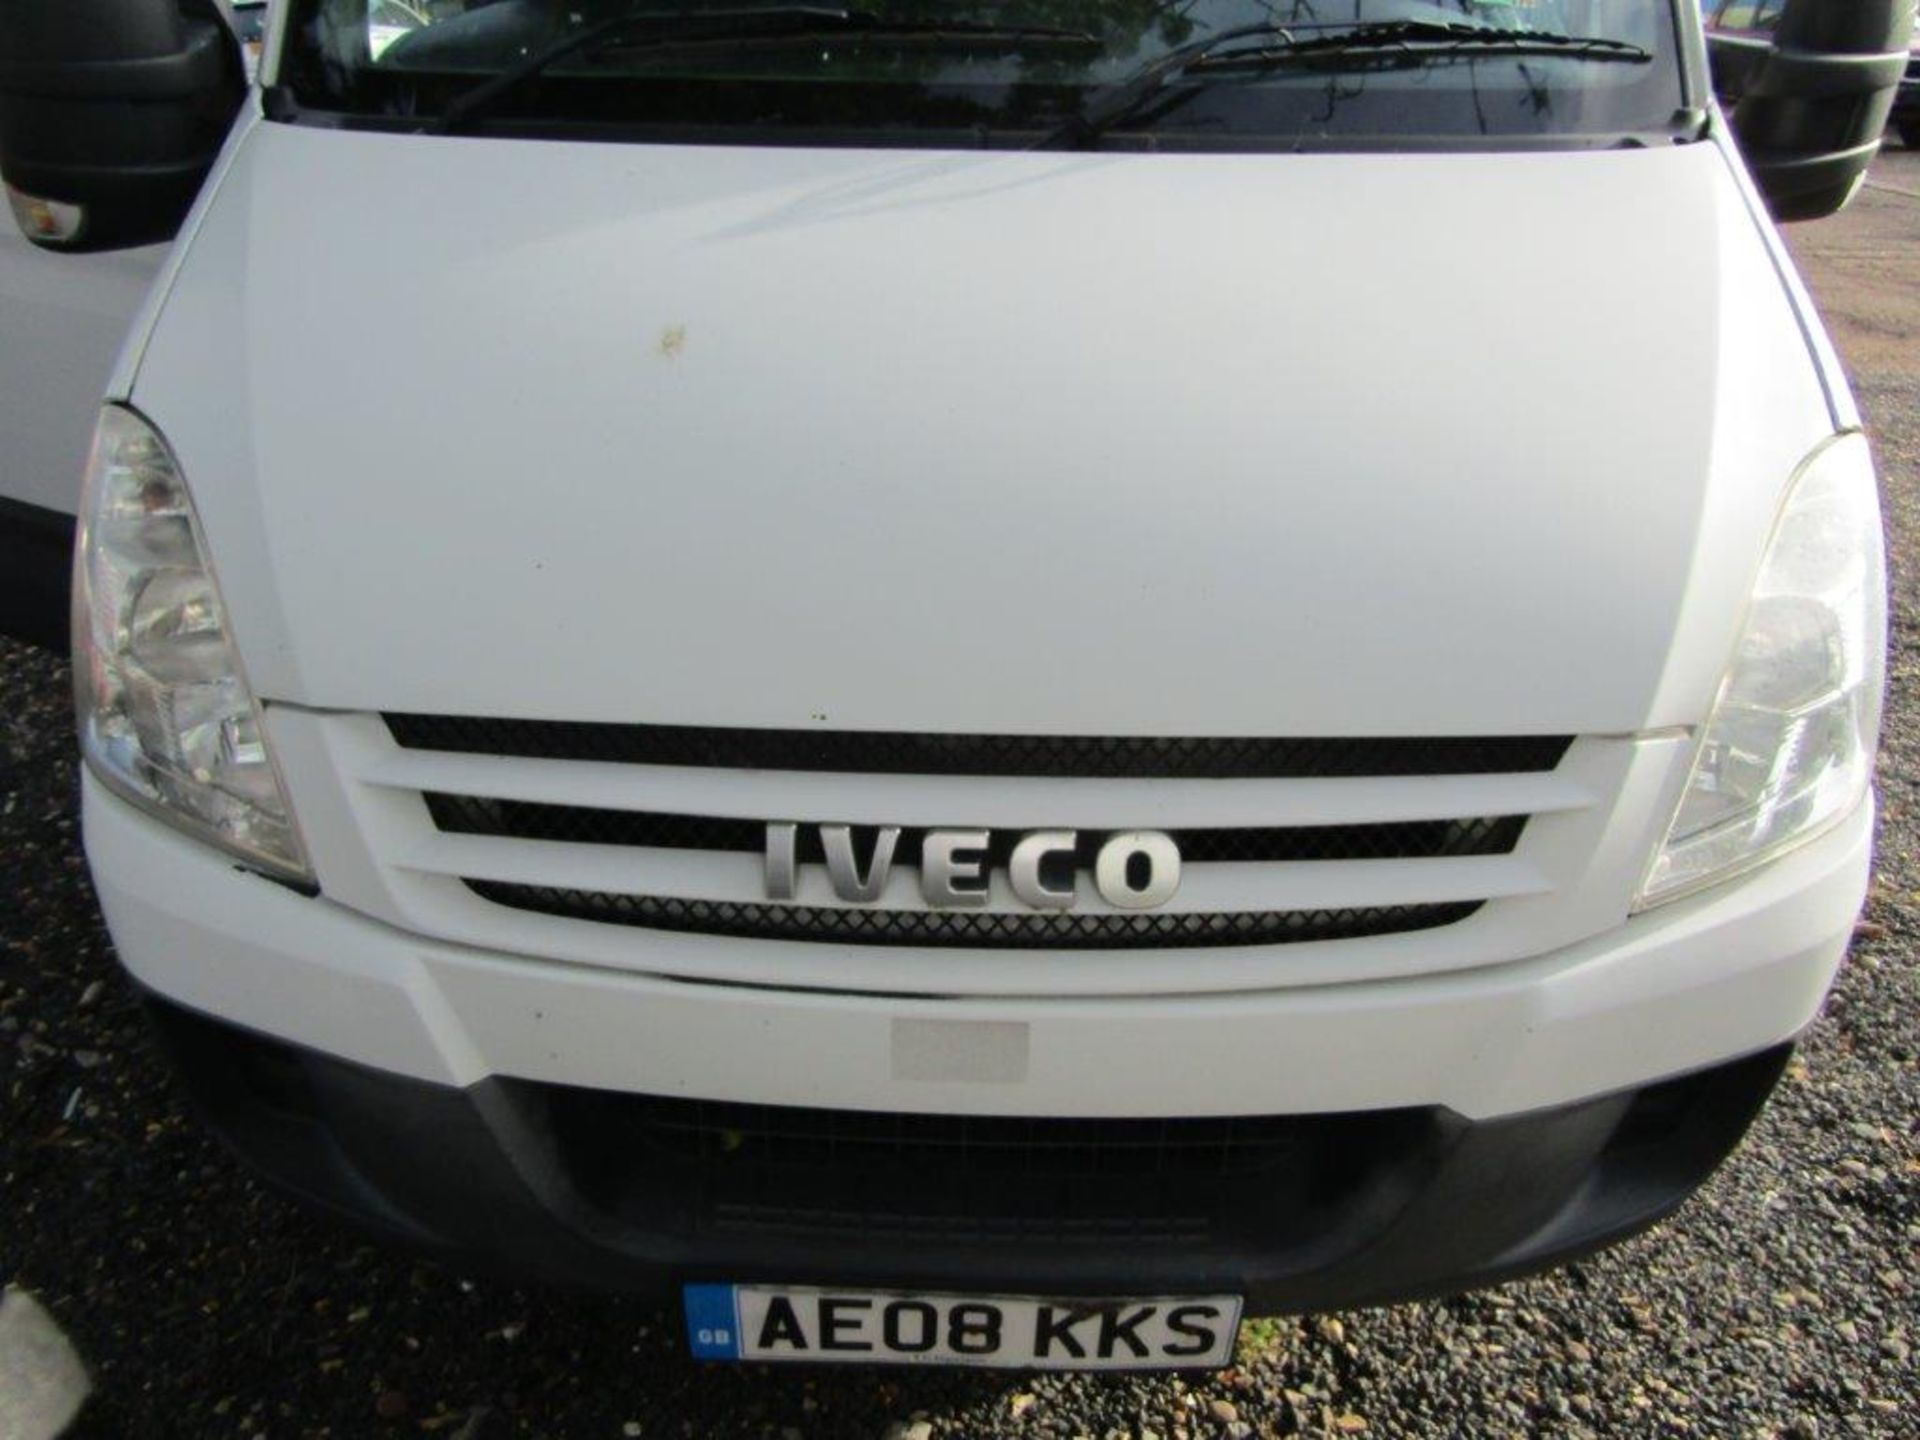 08 08 iveco Daily 35S14 MWB - Image 3 of 17